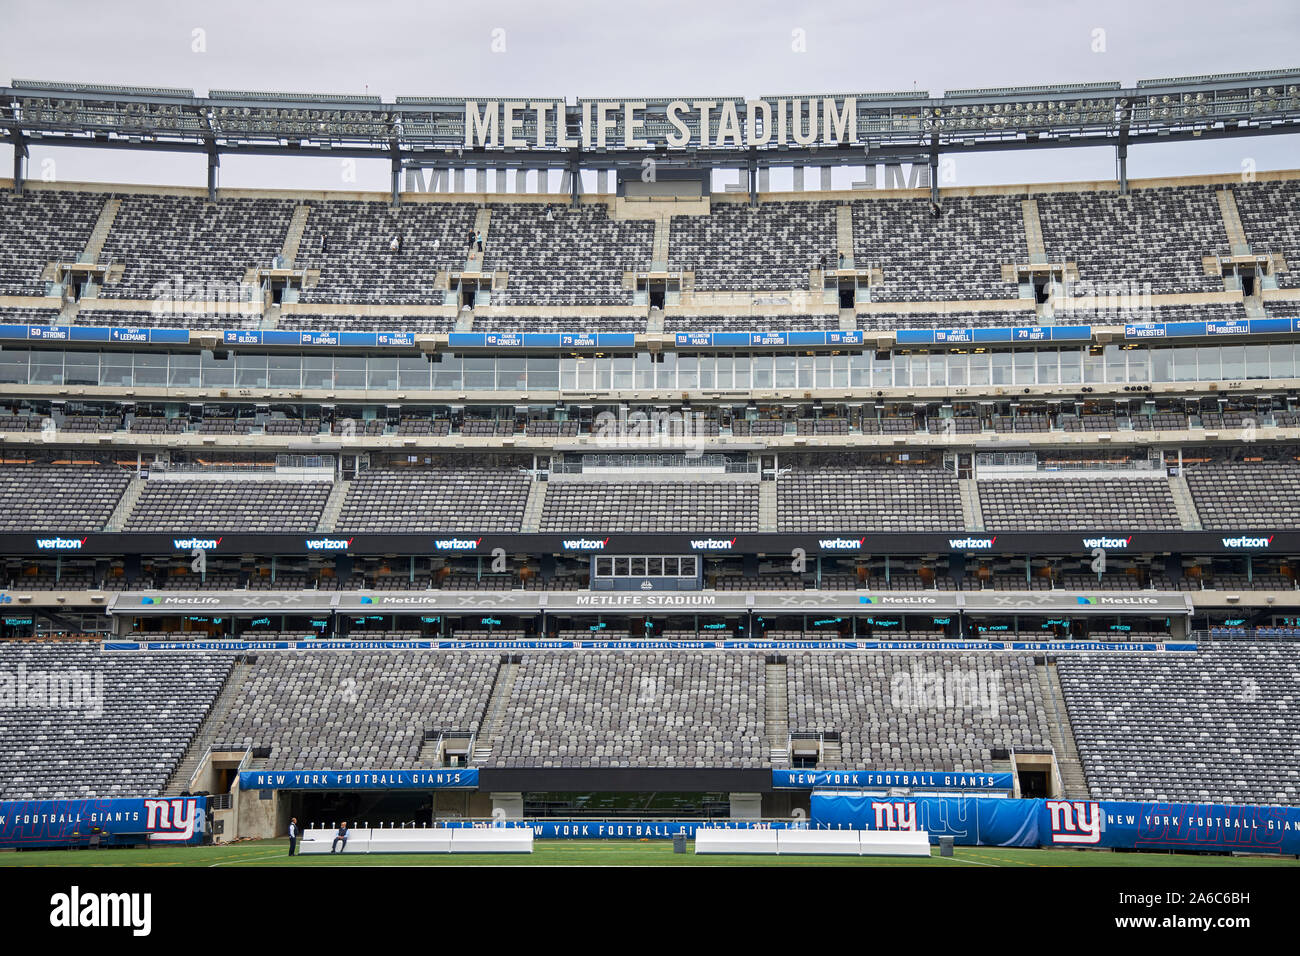 Concession selling New York Giants souvenirs at MetLife Stadium Stock Photo  - Alamy